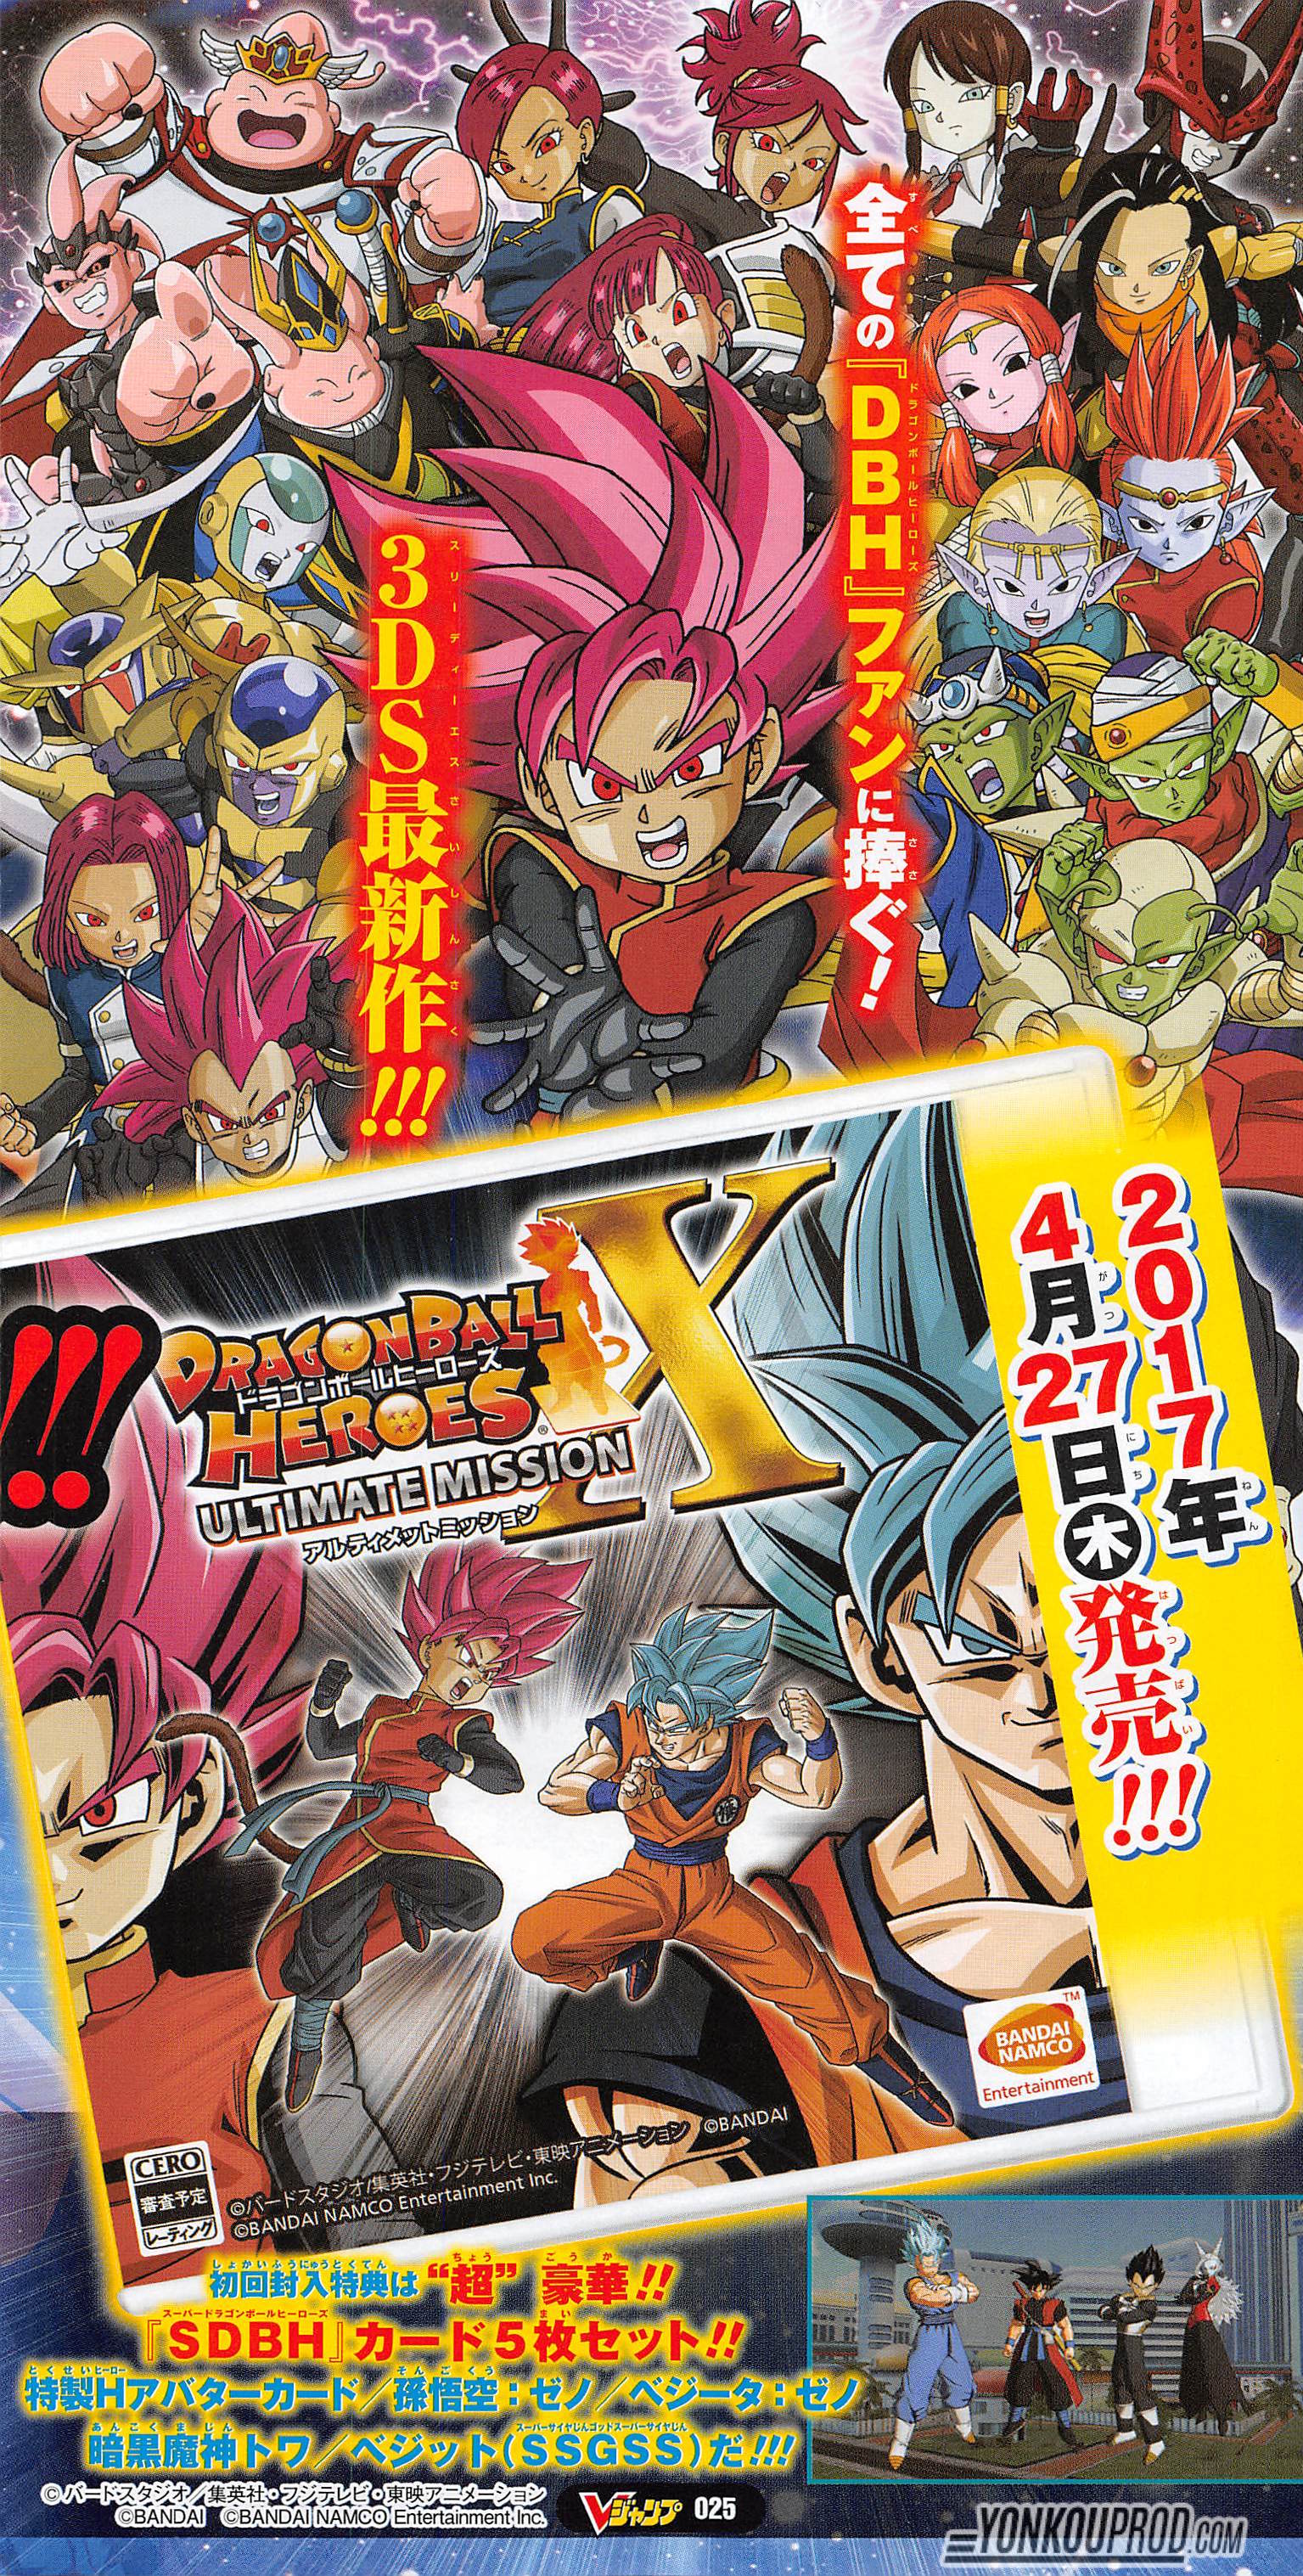 Dragon Ball Heroes: Ultimate Mission X for the Nintendo 3DS, out in